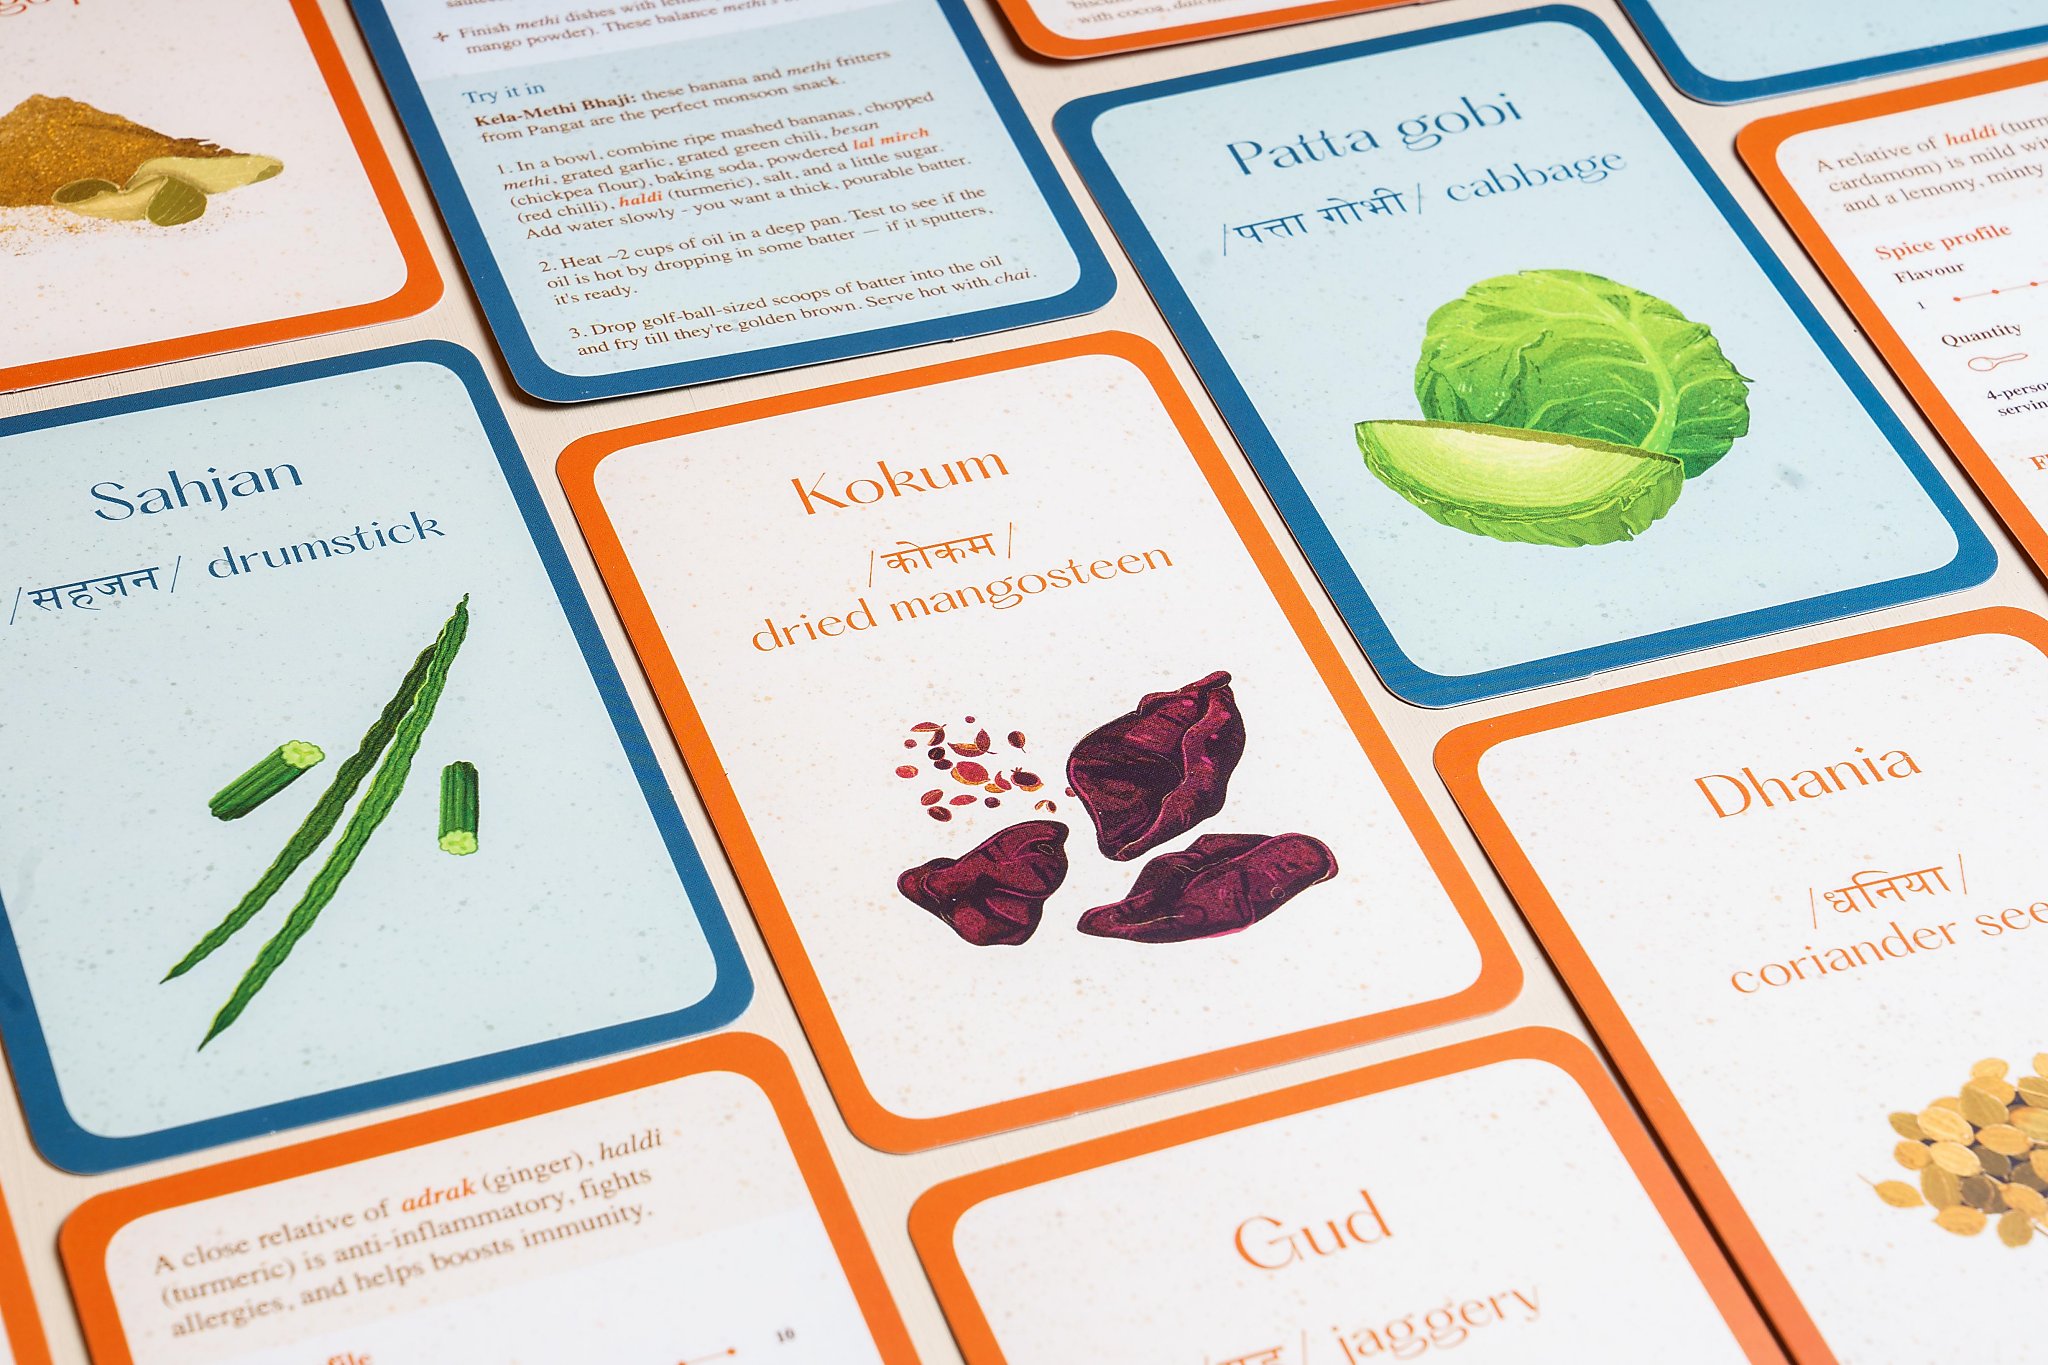 Skip the recipe search. A new tarot deck holds the answers to Indian cooking